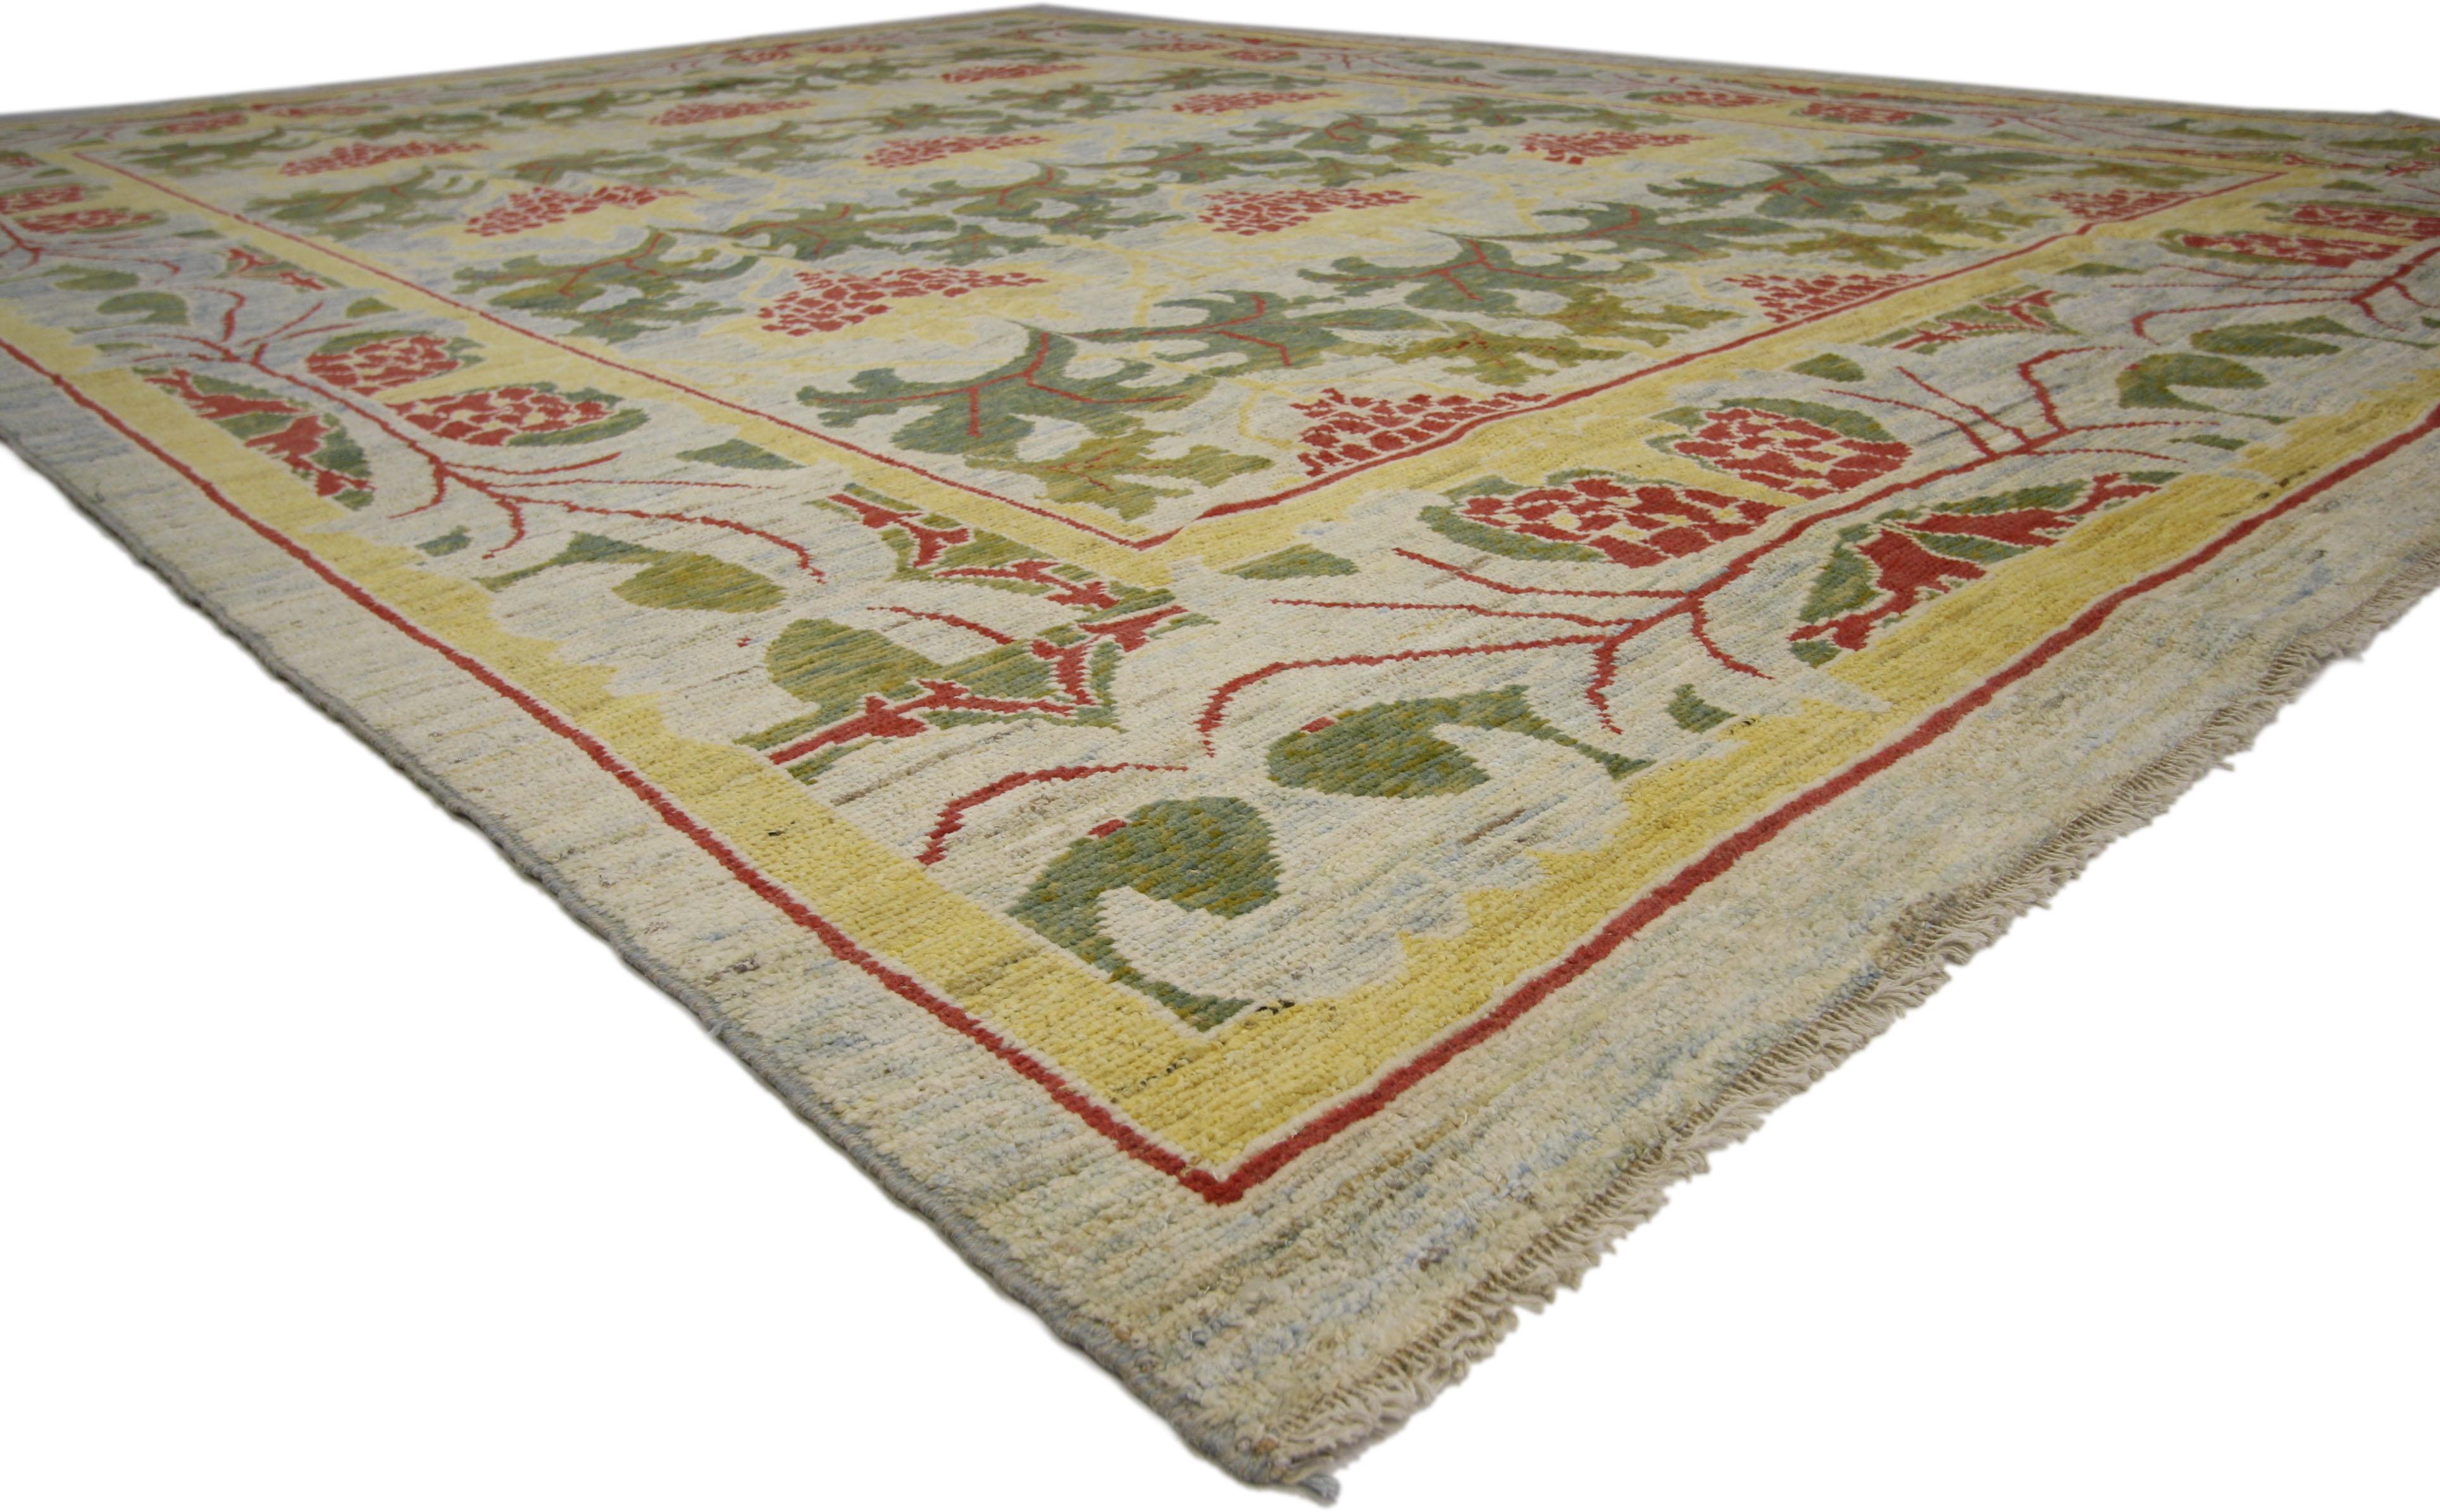 60748 New Contemporary Turkish Oushak Rug with Arts & Crafts Style Inspired by William Morris 10'10 x 15'02. The architectural elements of naturalistic forms combined with Arts and Crafts style, this new Turkish Oushak rug draws inspiration from